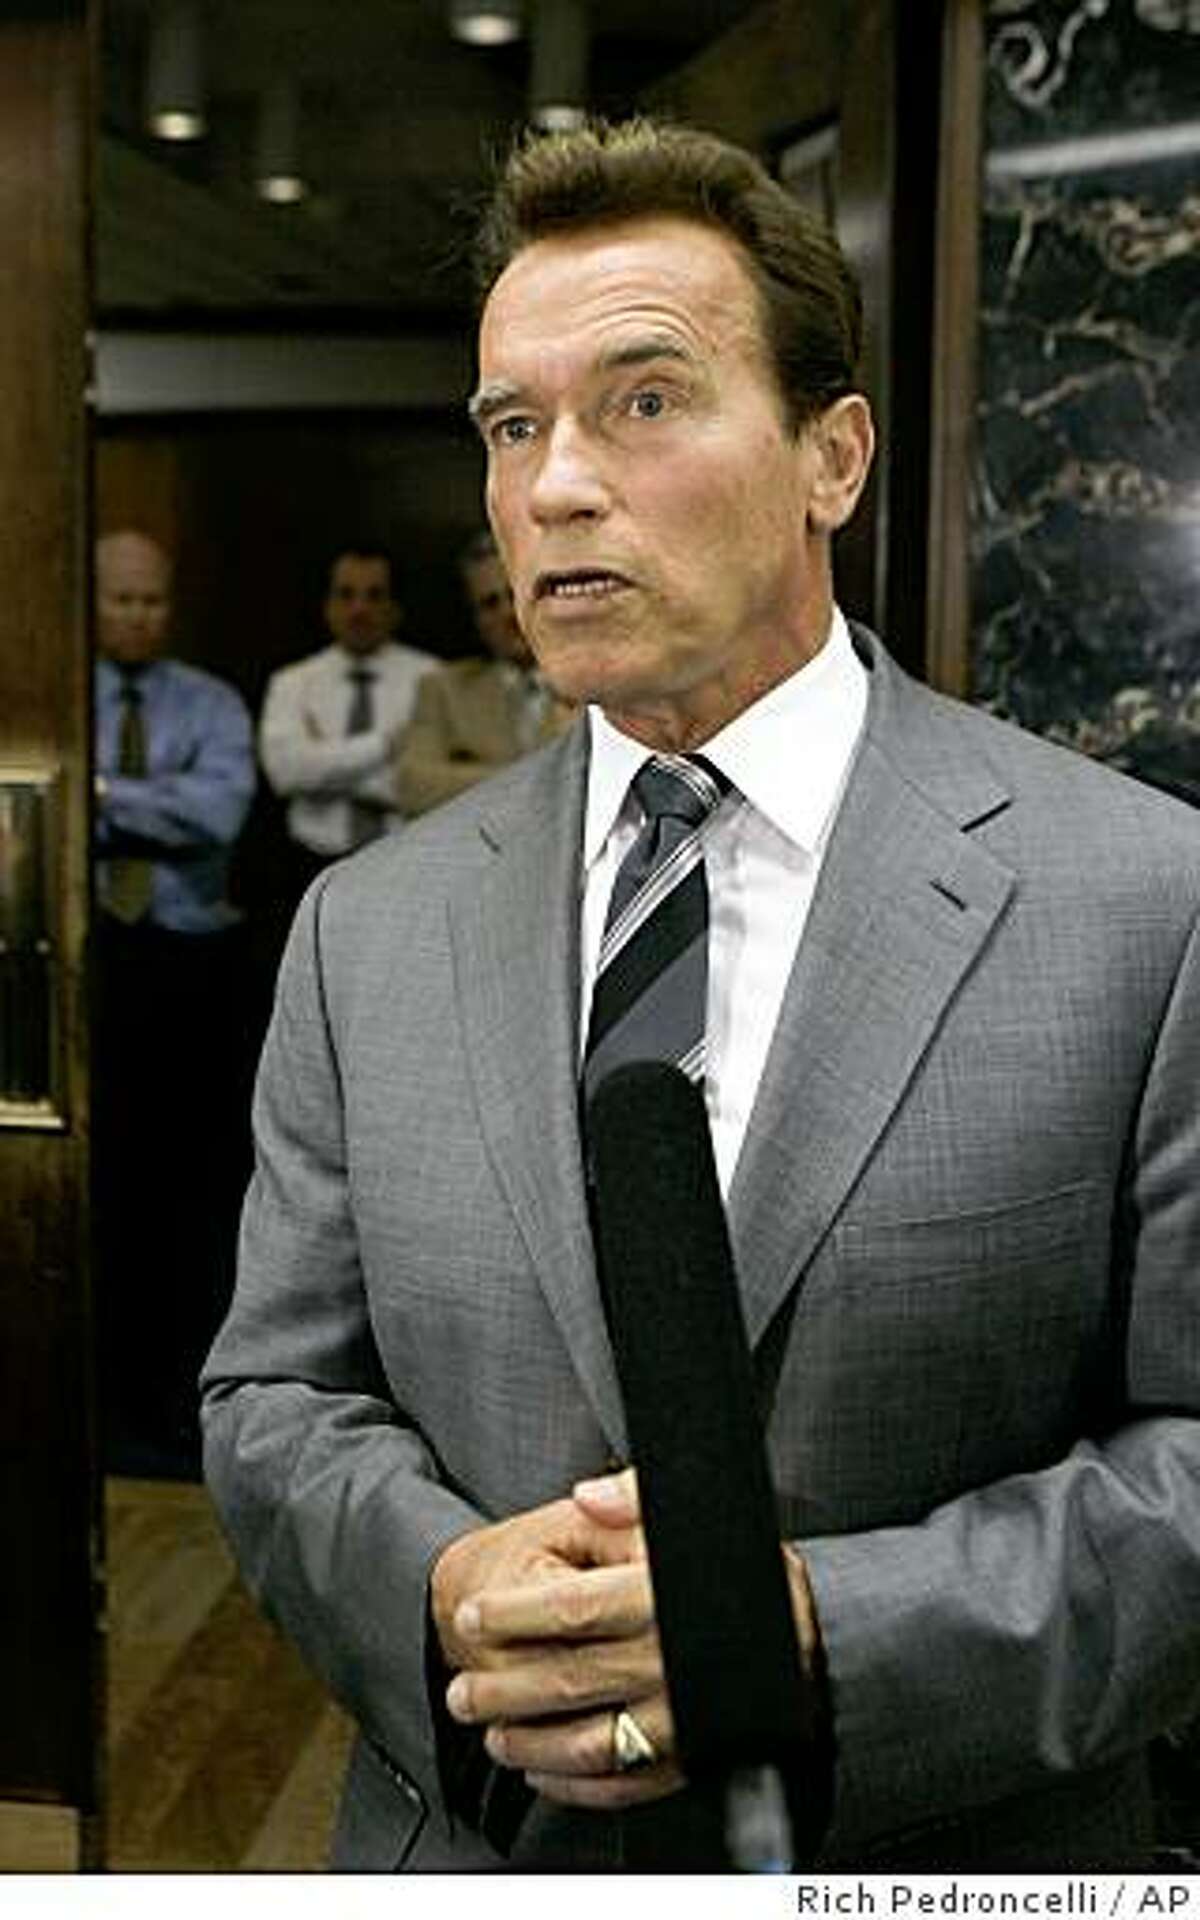 Gov. Arnold Schwarzenegger talks with reporters about the Legislature's failure to reach a solution to the state budget deficit, outside his Capitol office in Sacramento, Calif., Tuesday, Nov. 25, 2008. The Legislature failed to approve a Democratic budget package which included $8.1 billion in budget cuts and $8.1 billion in new revenues.(AP Photo/Rich Pedroncelli)